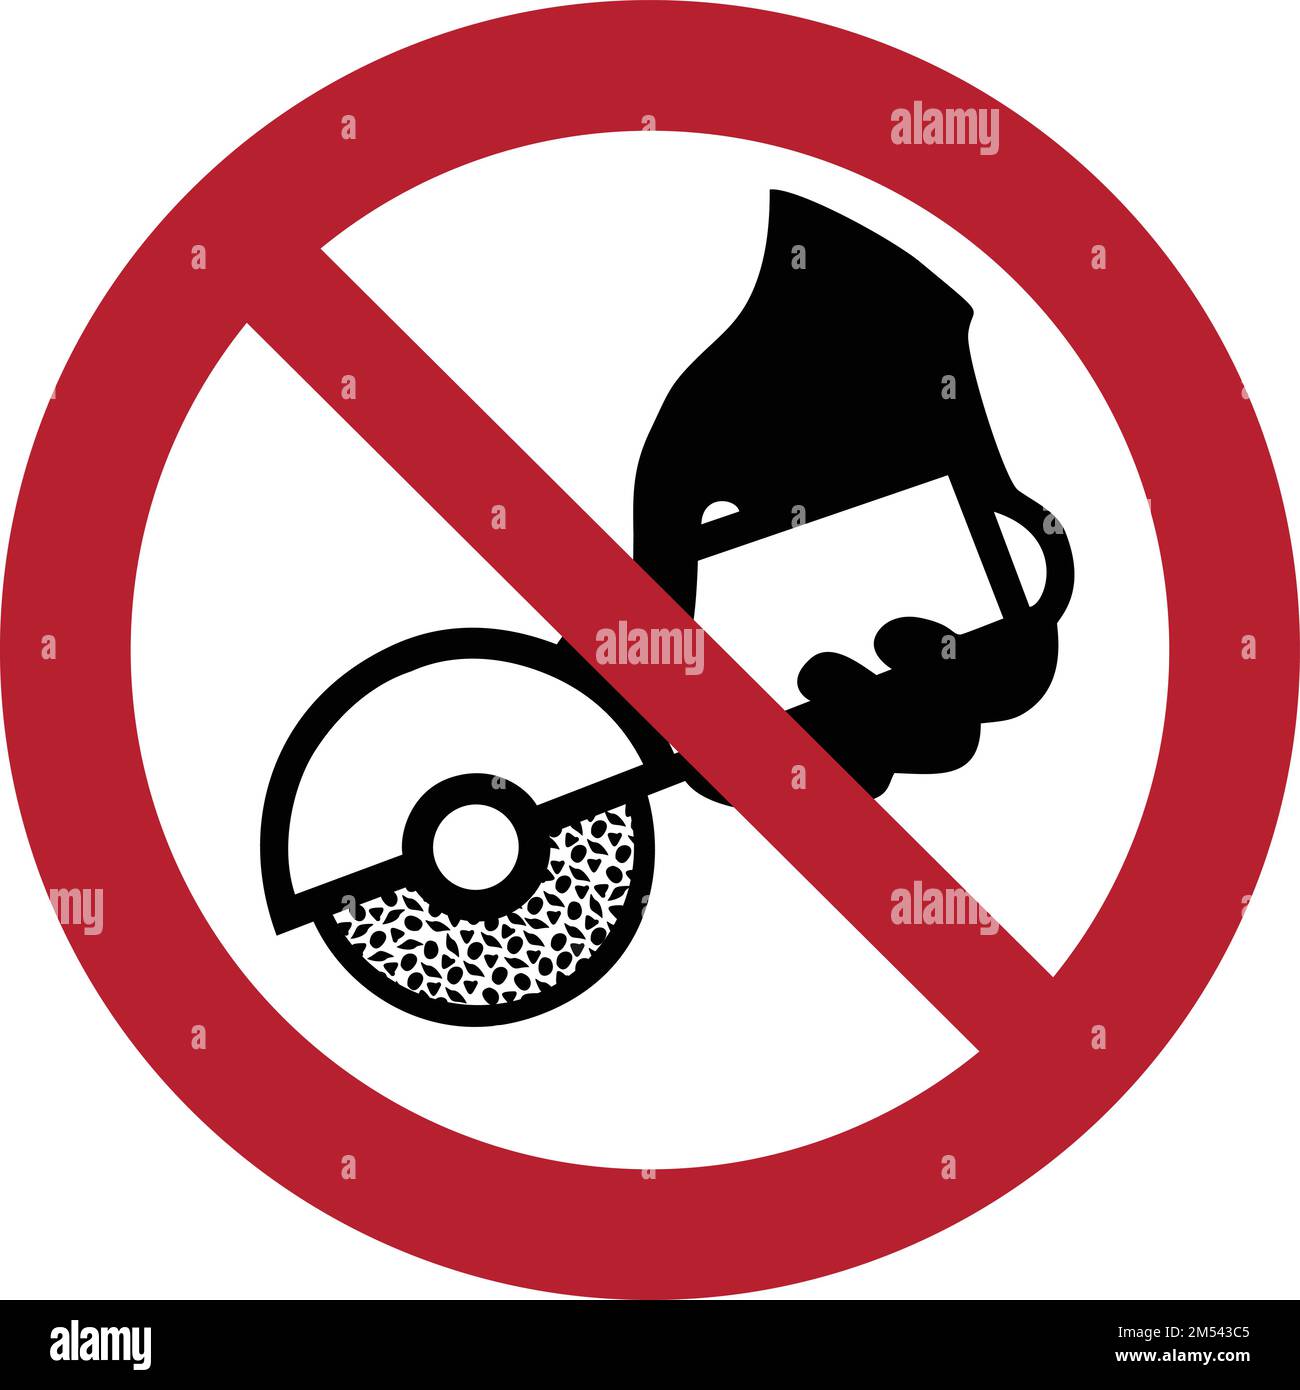 Do not use with hand-held grinding machine - prohibiton sign Stock Vector